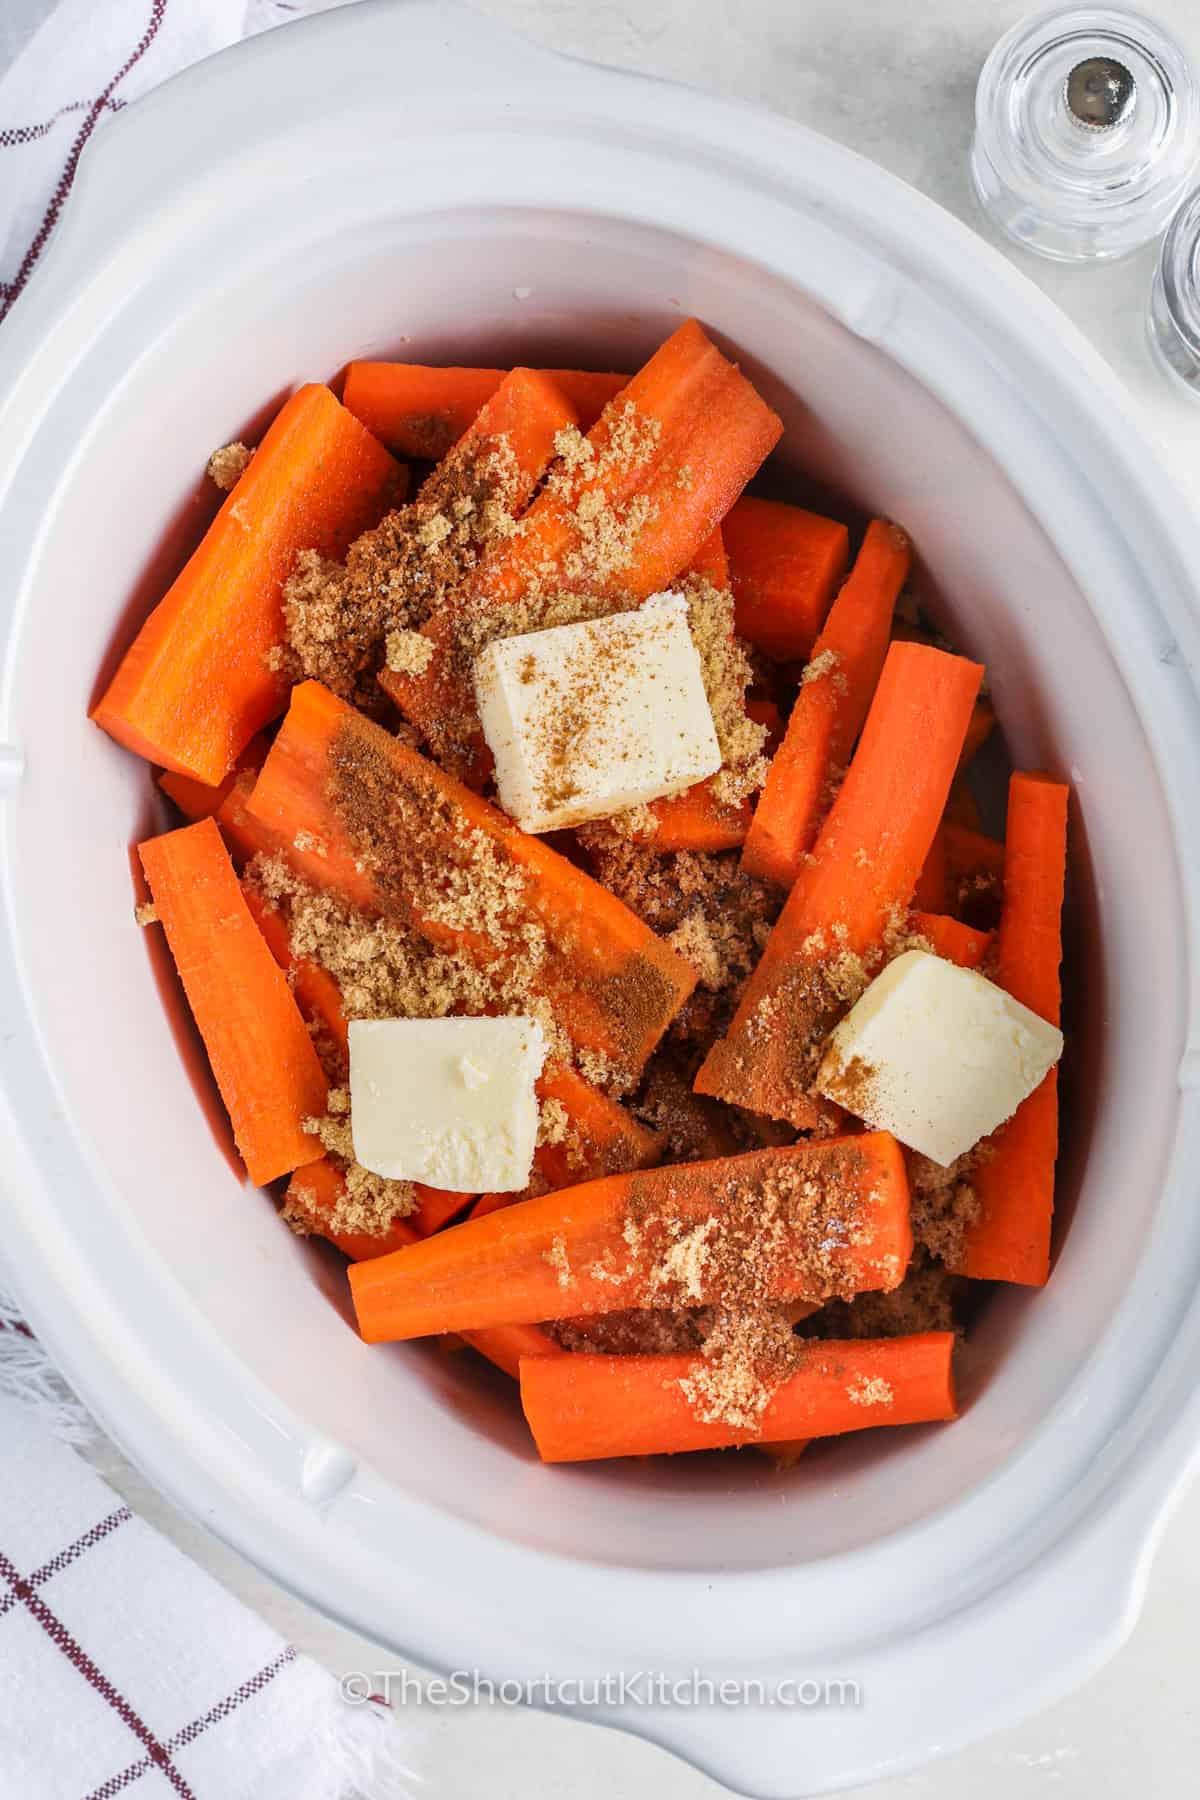 ingredients in the crock pot to make Crockpot Carrots